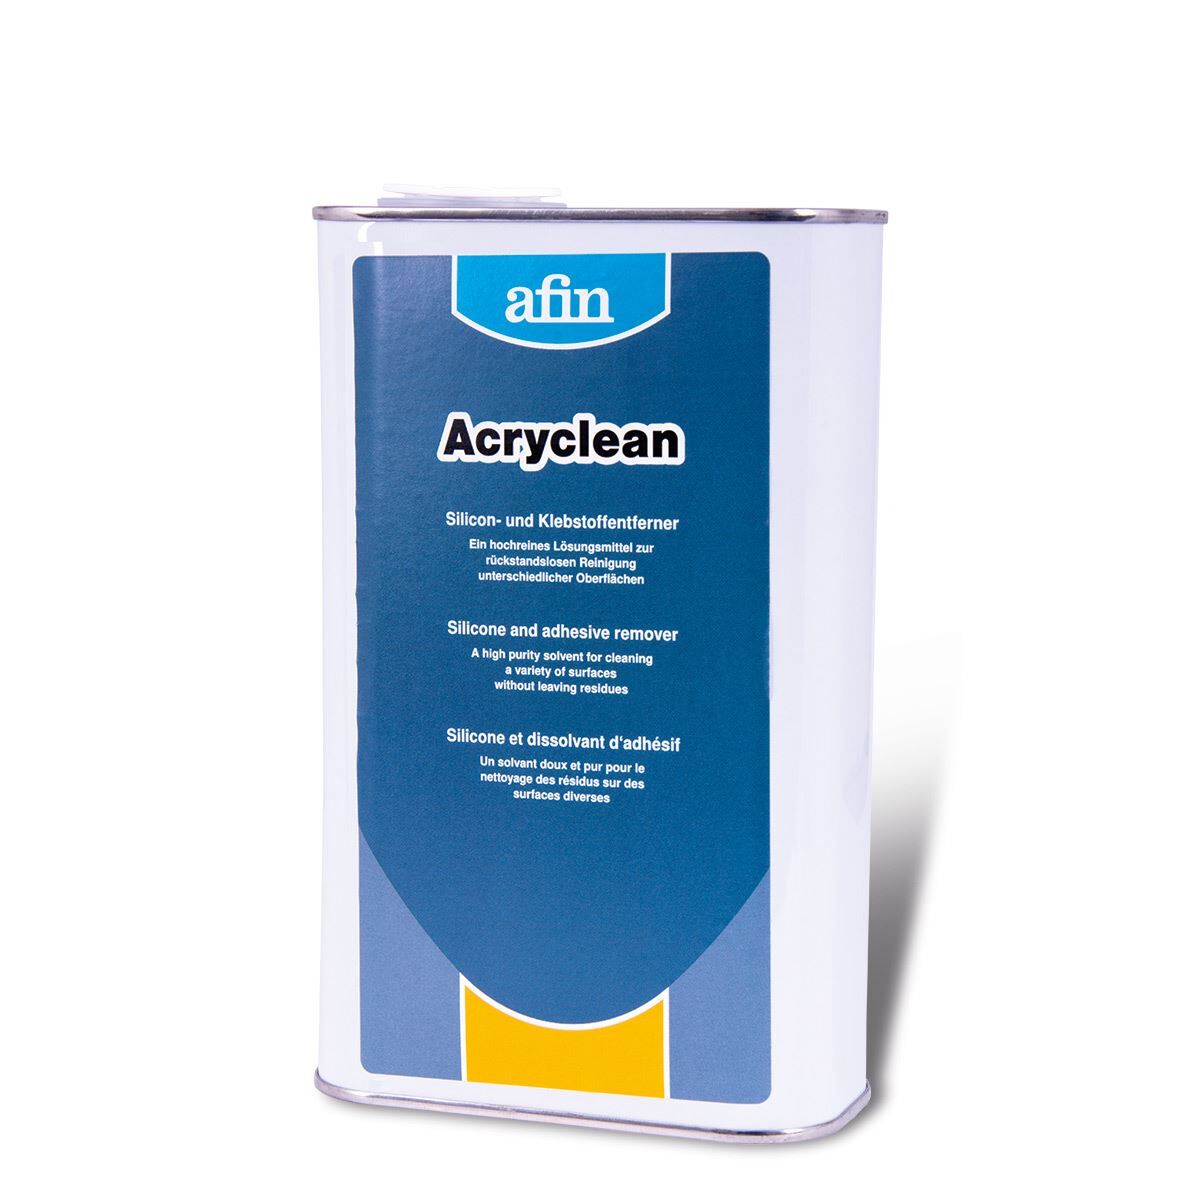 afin Acryclean - Siliconentferner